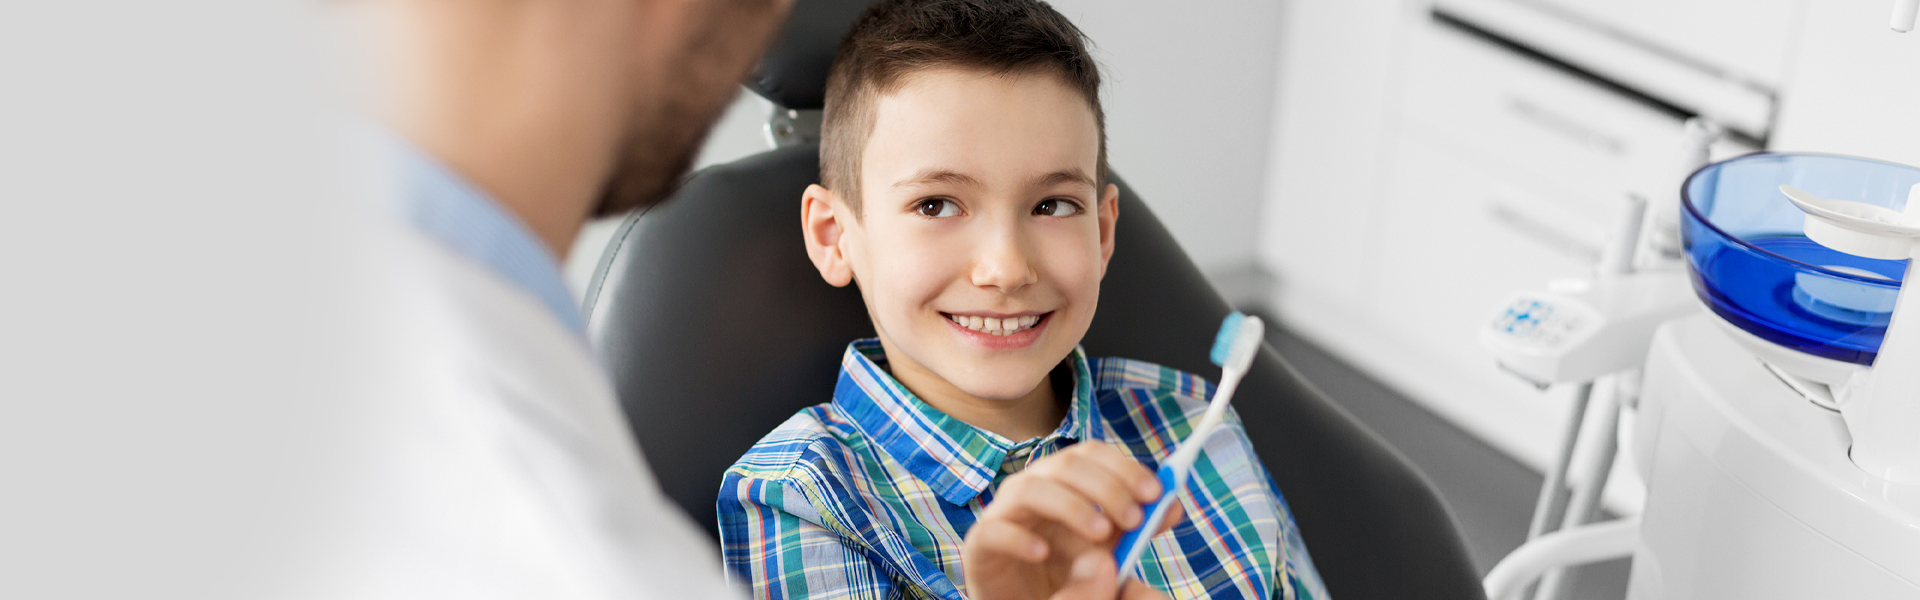 Pediatric Dentistry Service: Does Your Child Need Specialized Care?